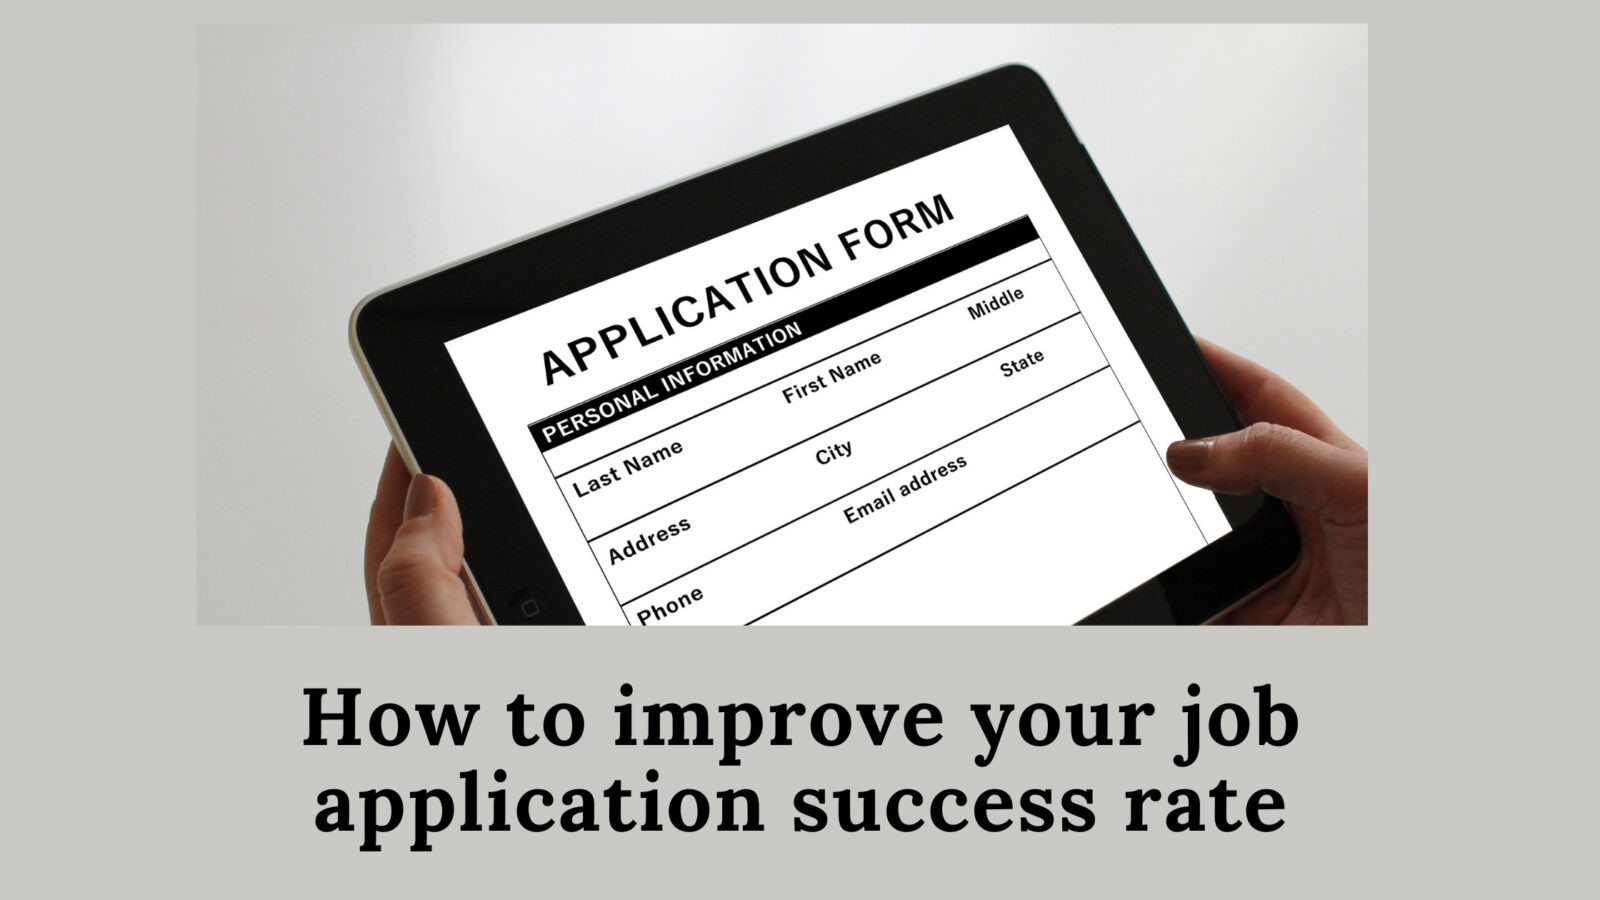 How to improve your job application success rate